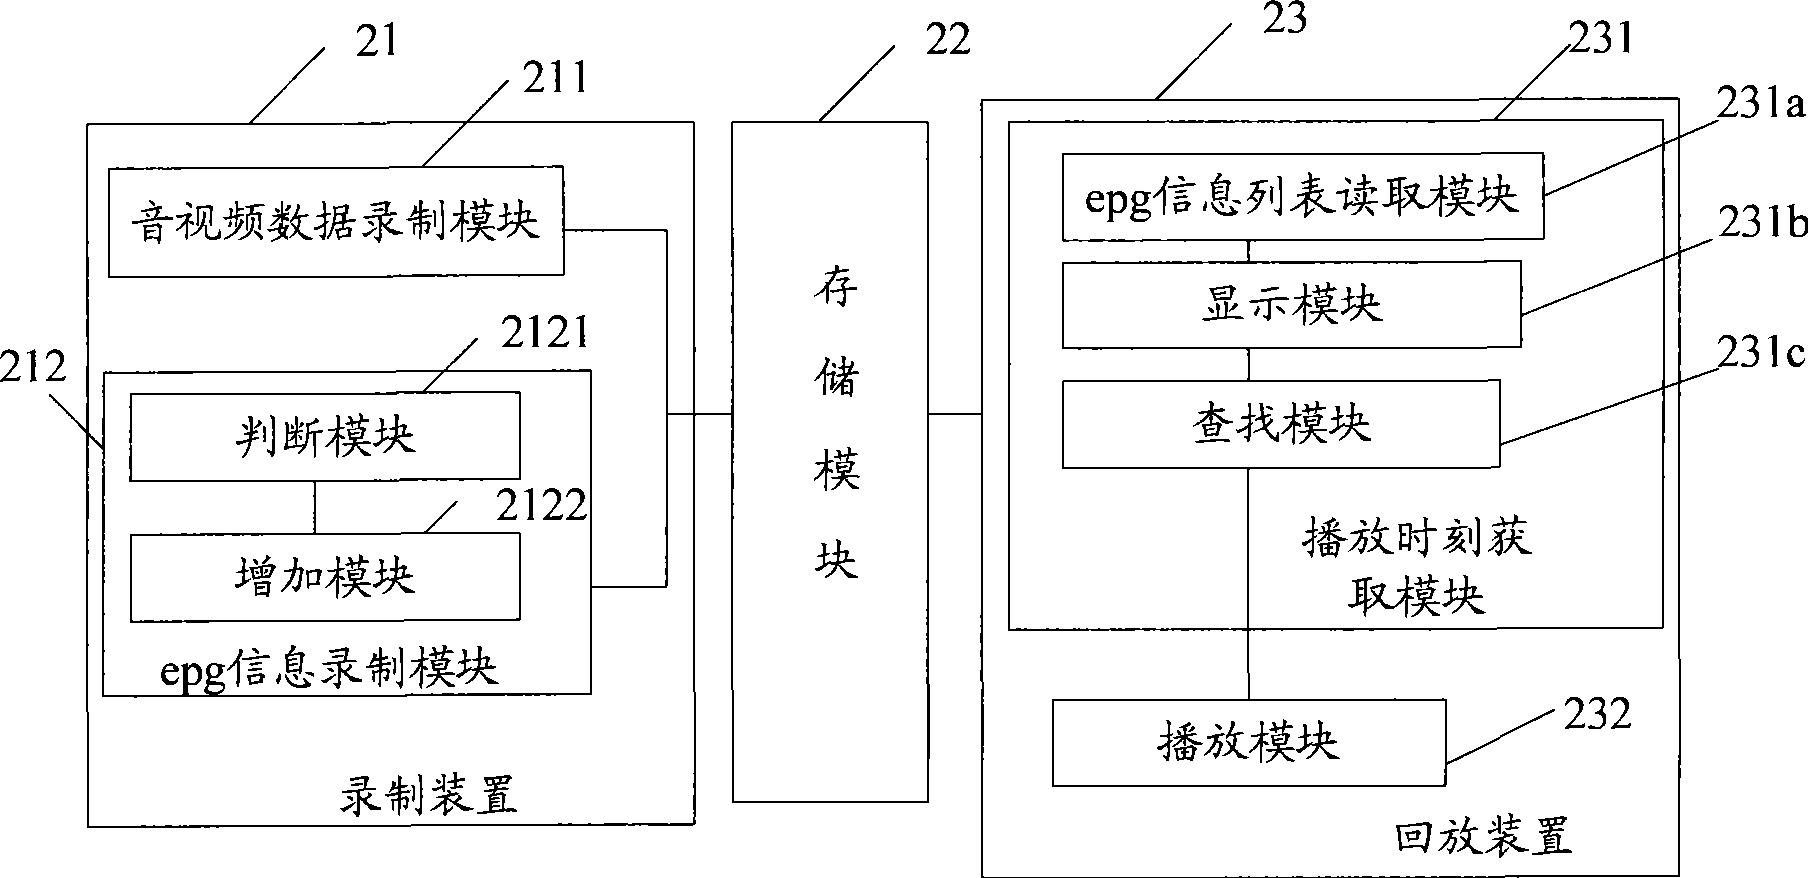 Audio, video data recording and replaying method and system for digital television